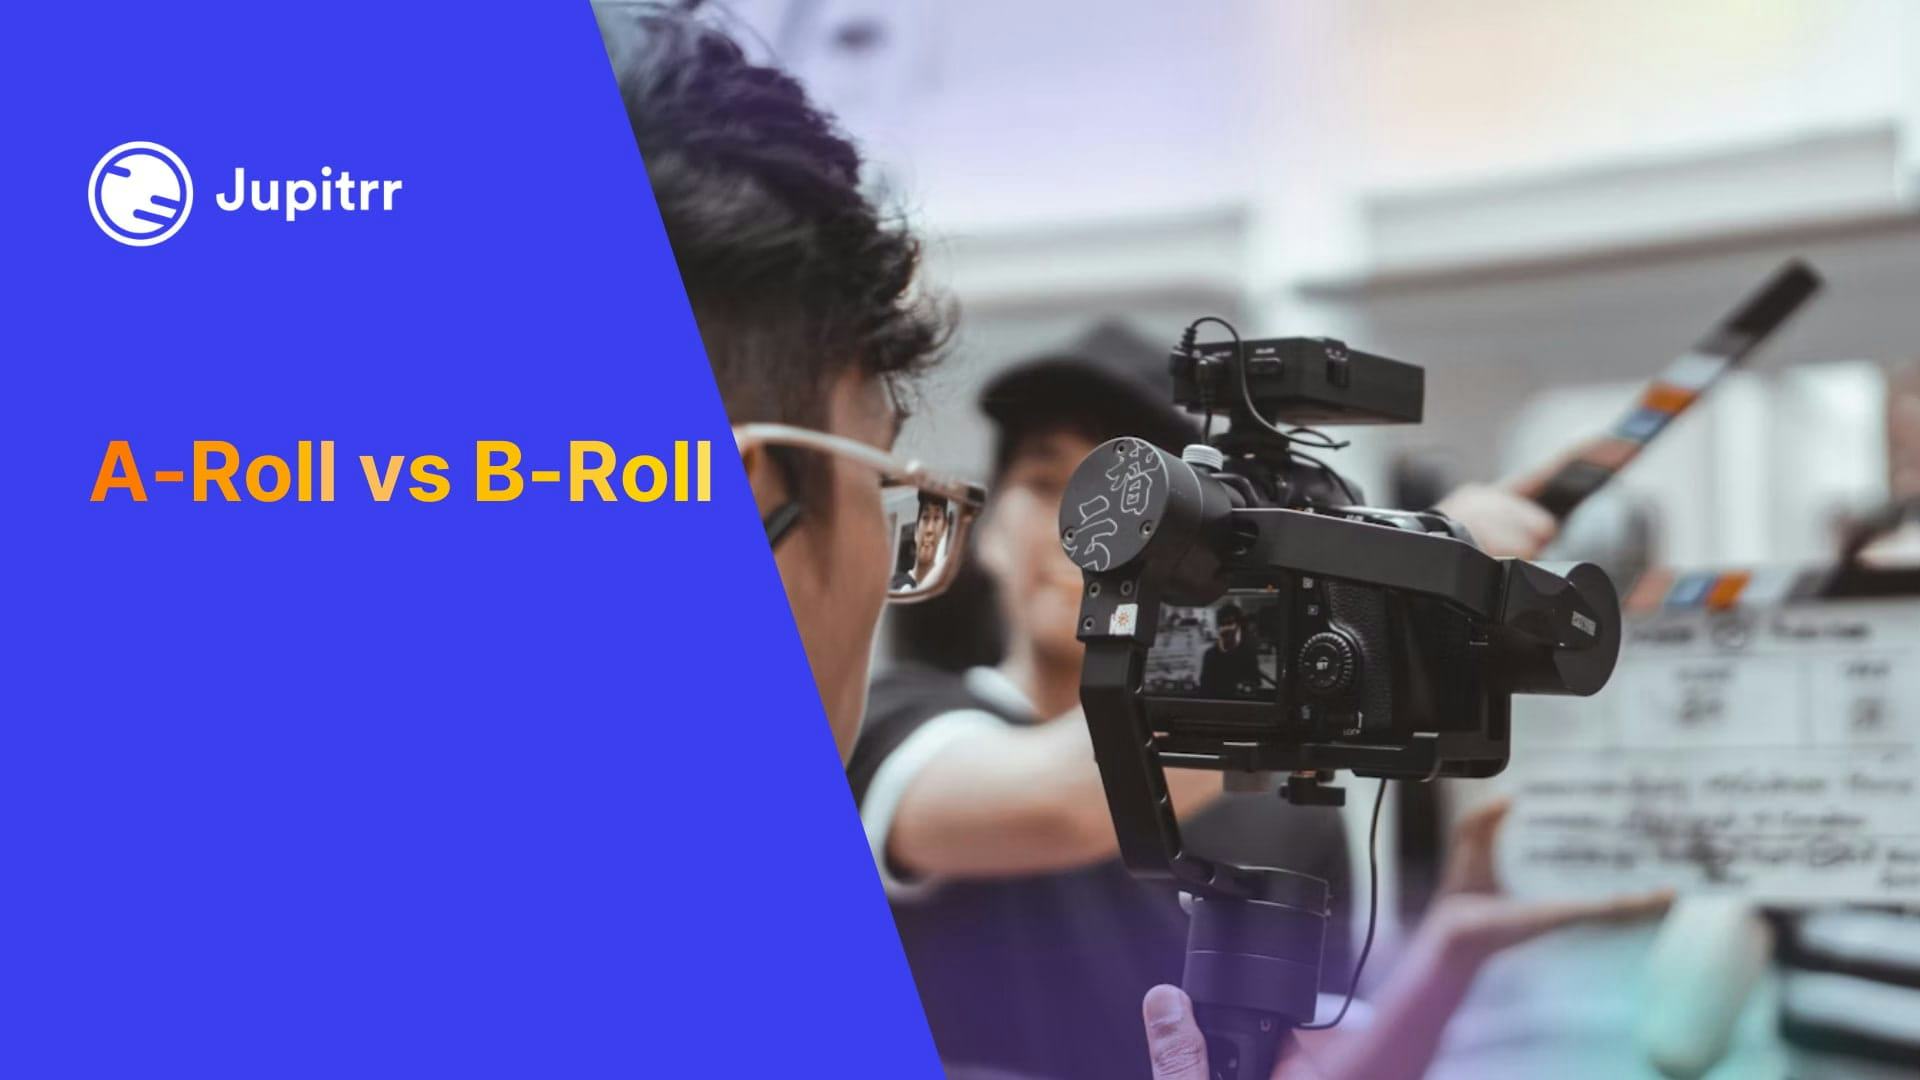 A-Roll vs B-Roll: How are they Different?